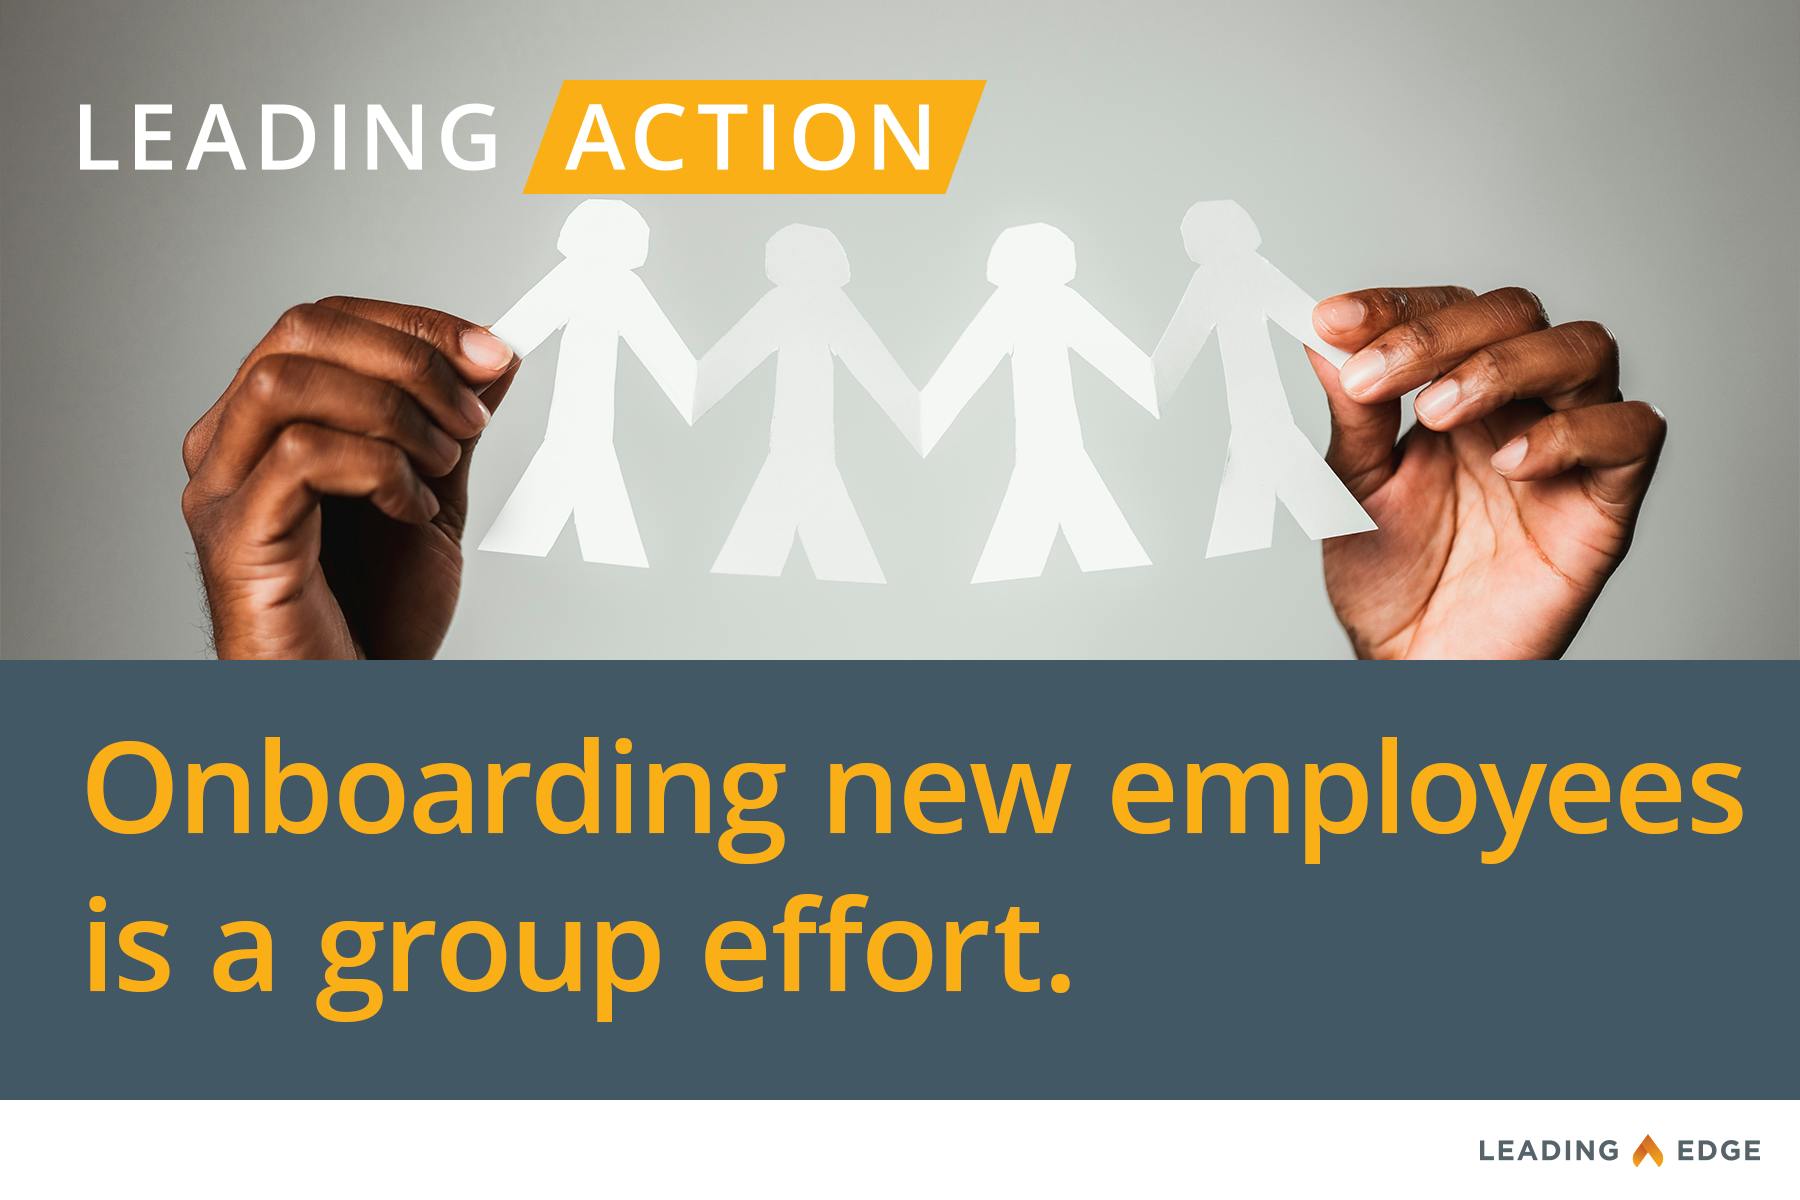 Leading Action: Onboarding new employees is a group effort